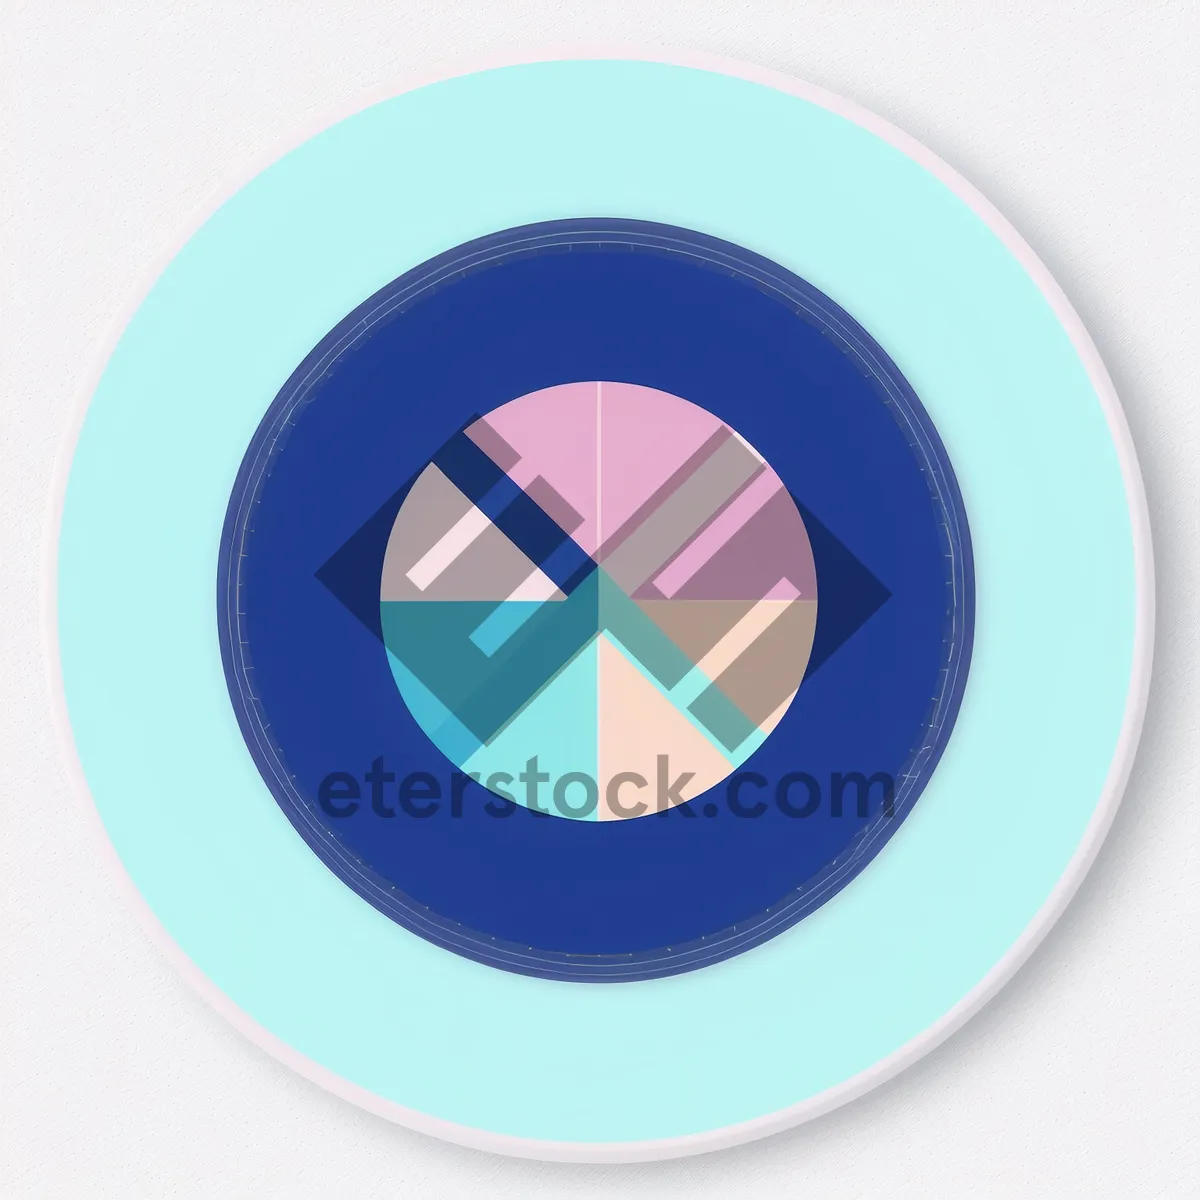 Picture of 3D Round Glossy Web Button